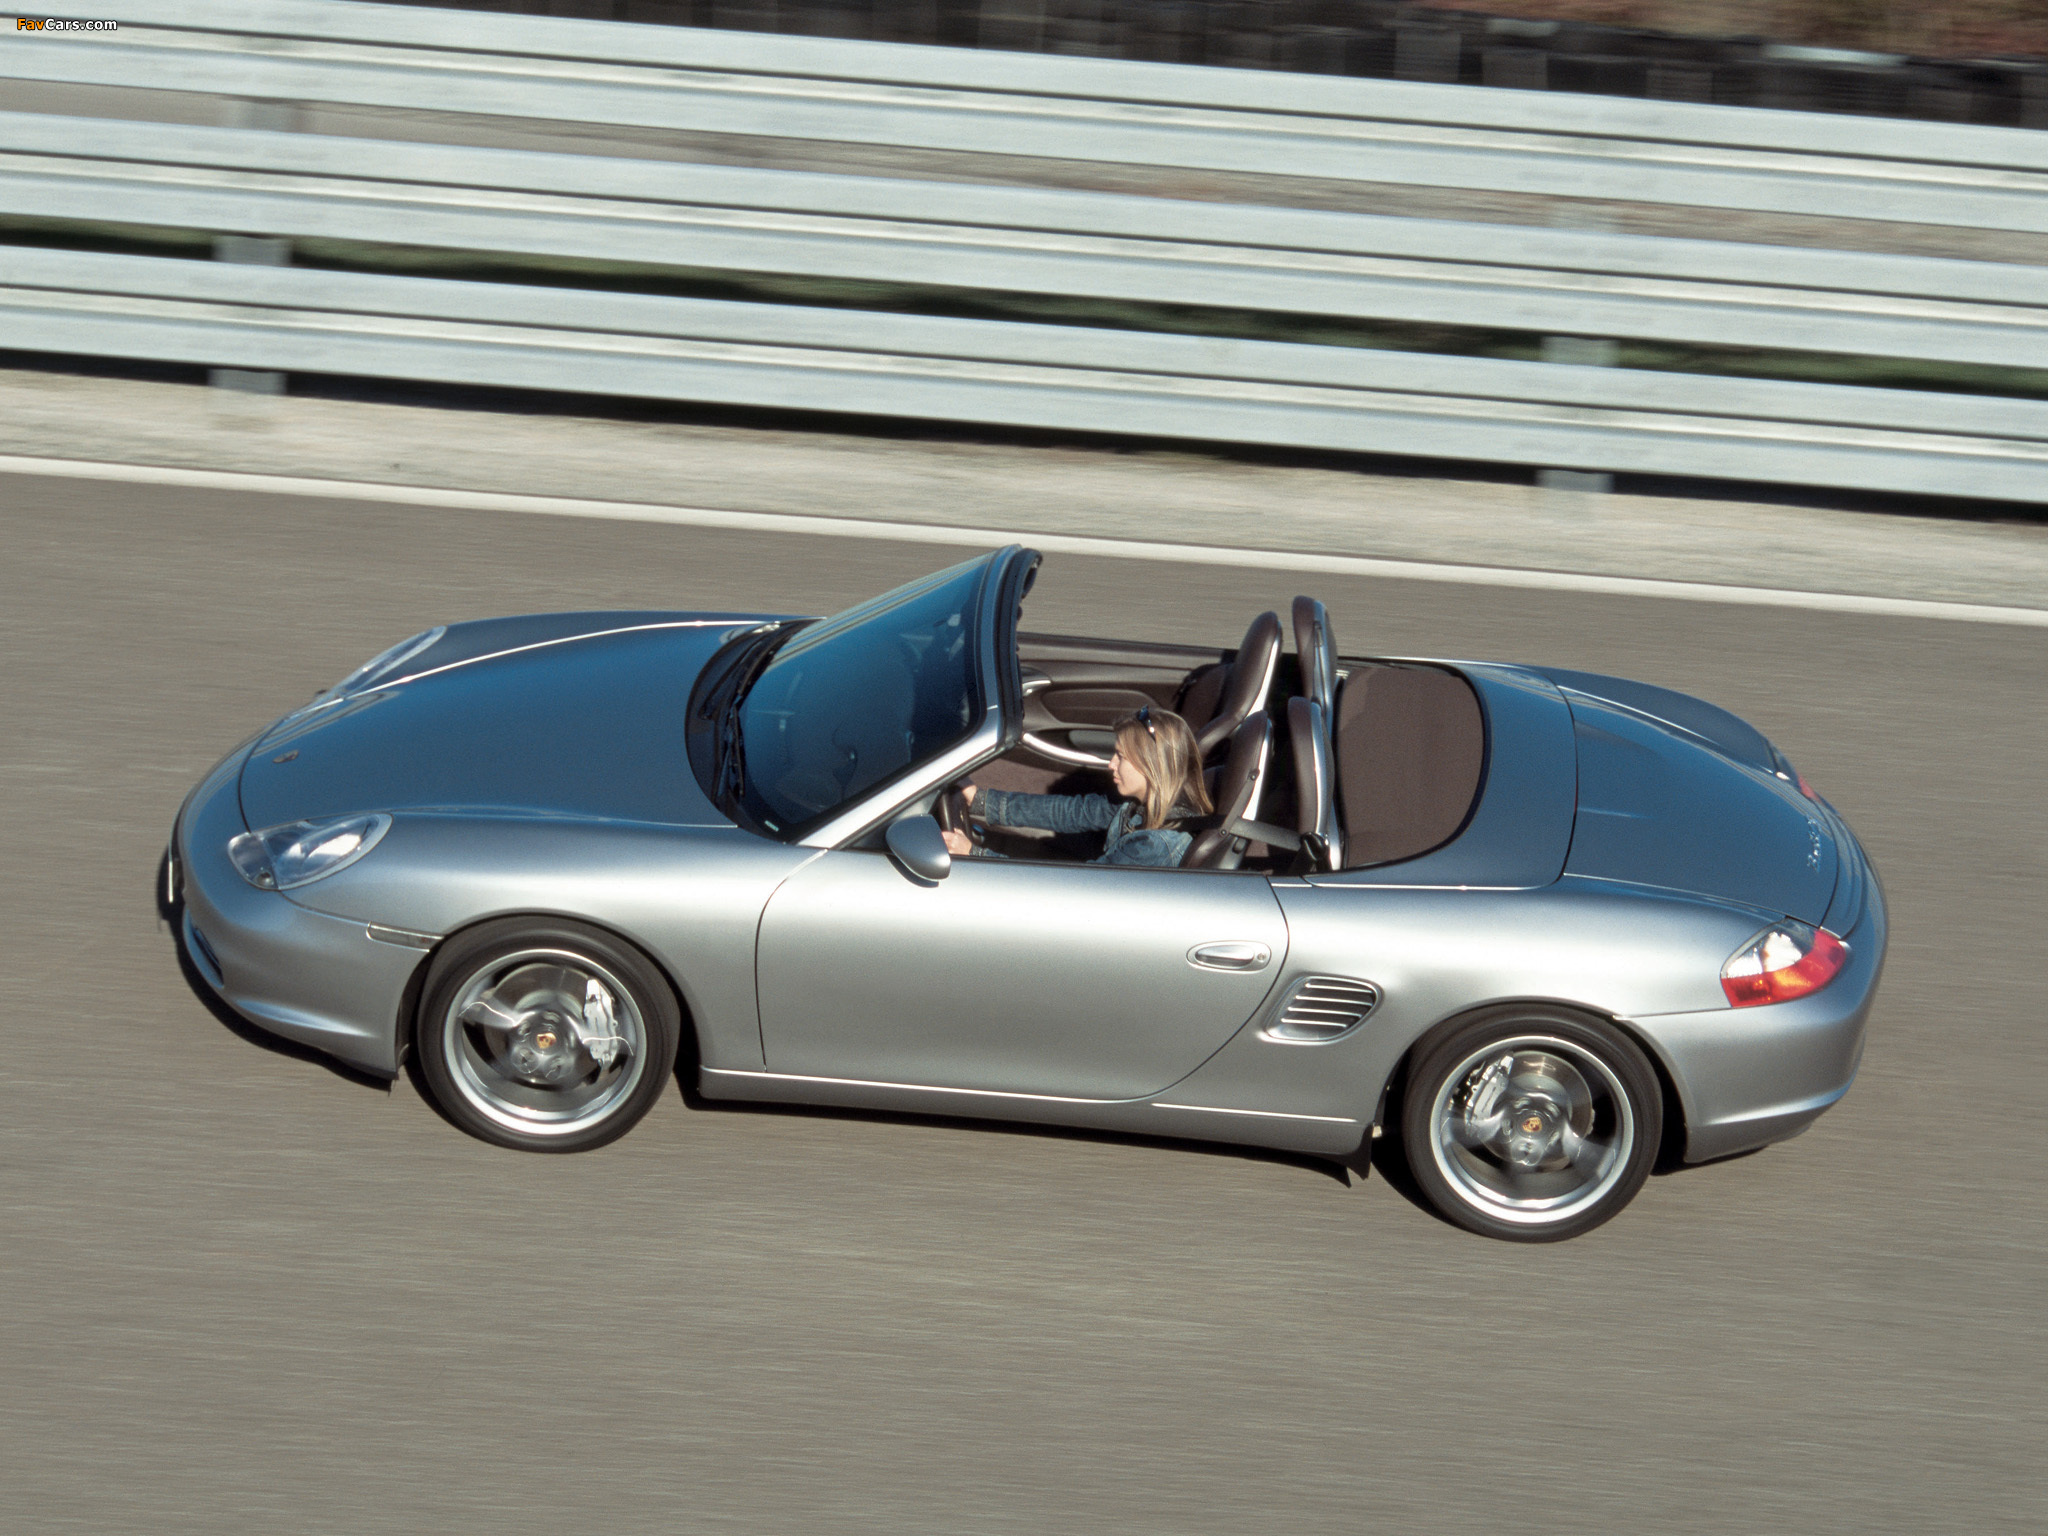 Porsche Boxster S 50 years 550 Spyder (986) 2004 pictures (2048 x 1536)